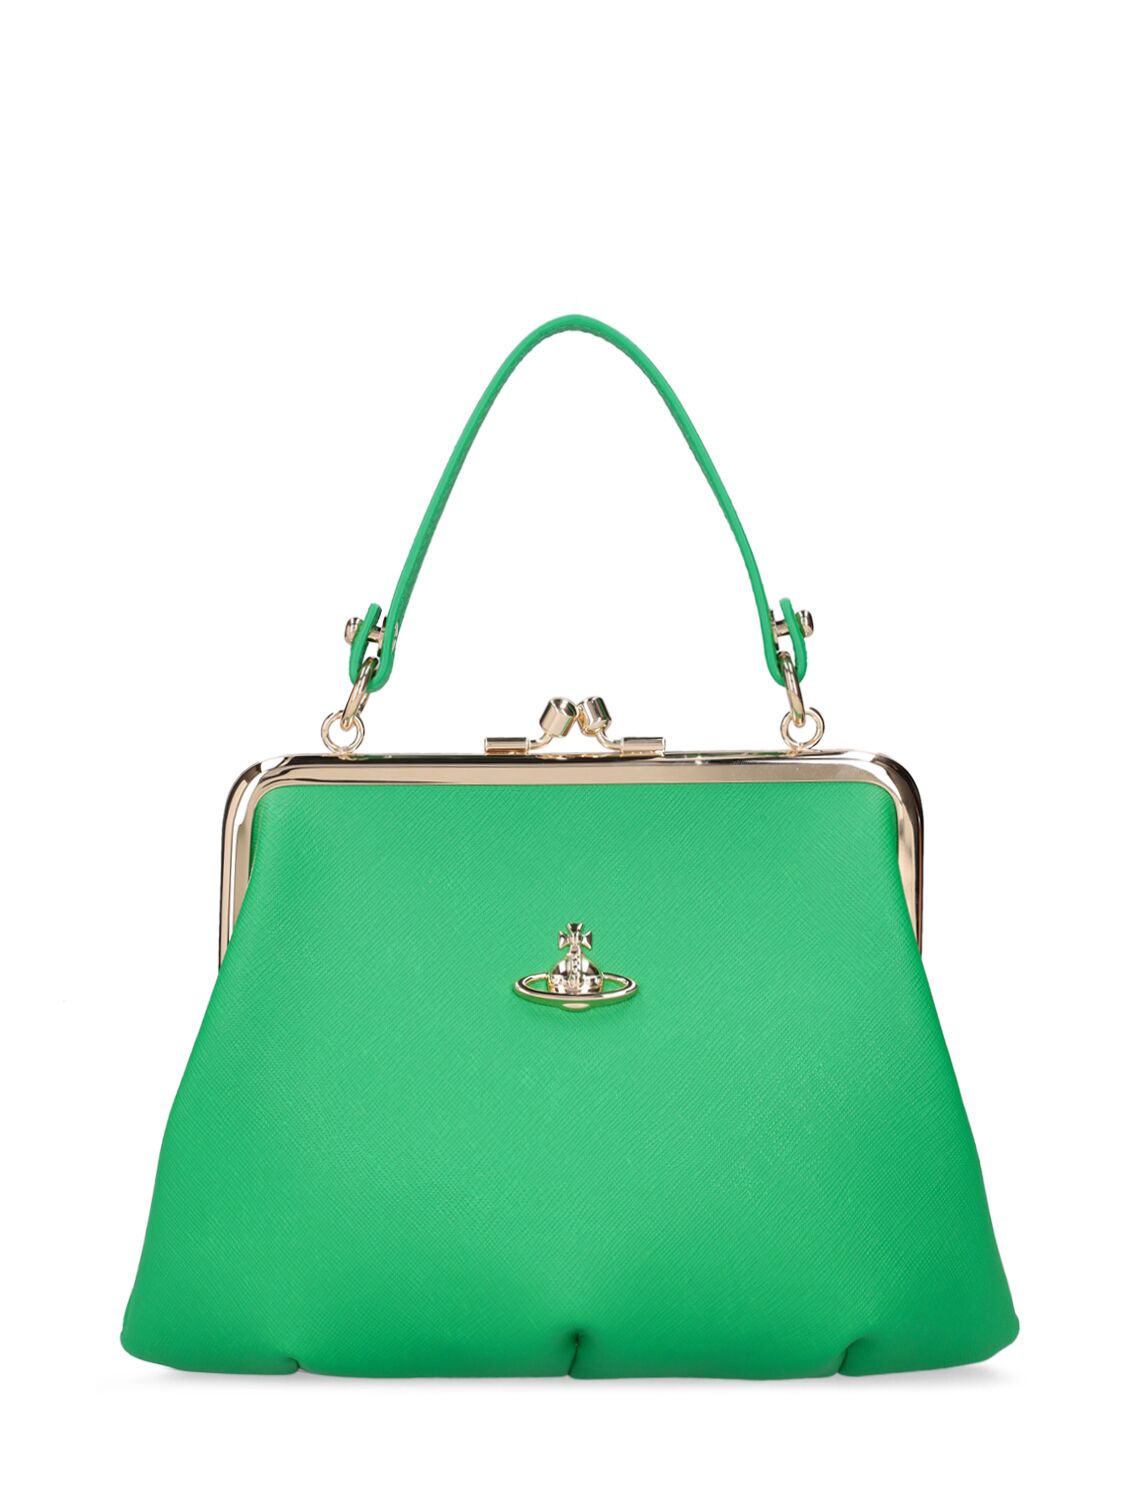 Vivienne Westwood Granny Frame Leather Top Handle Bag In Bright Green